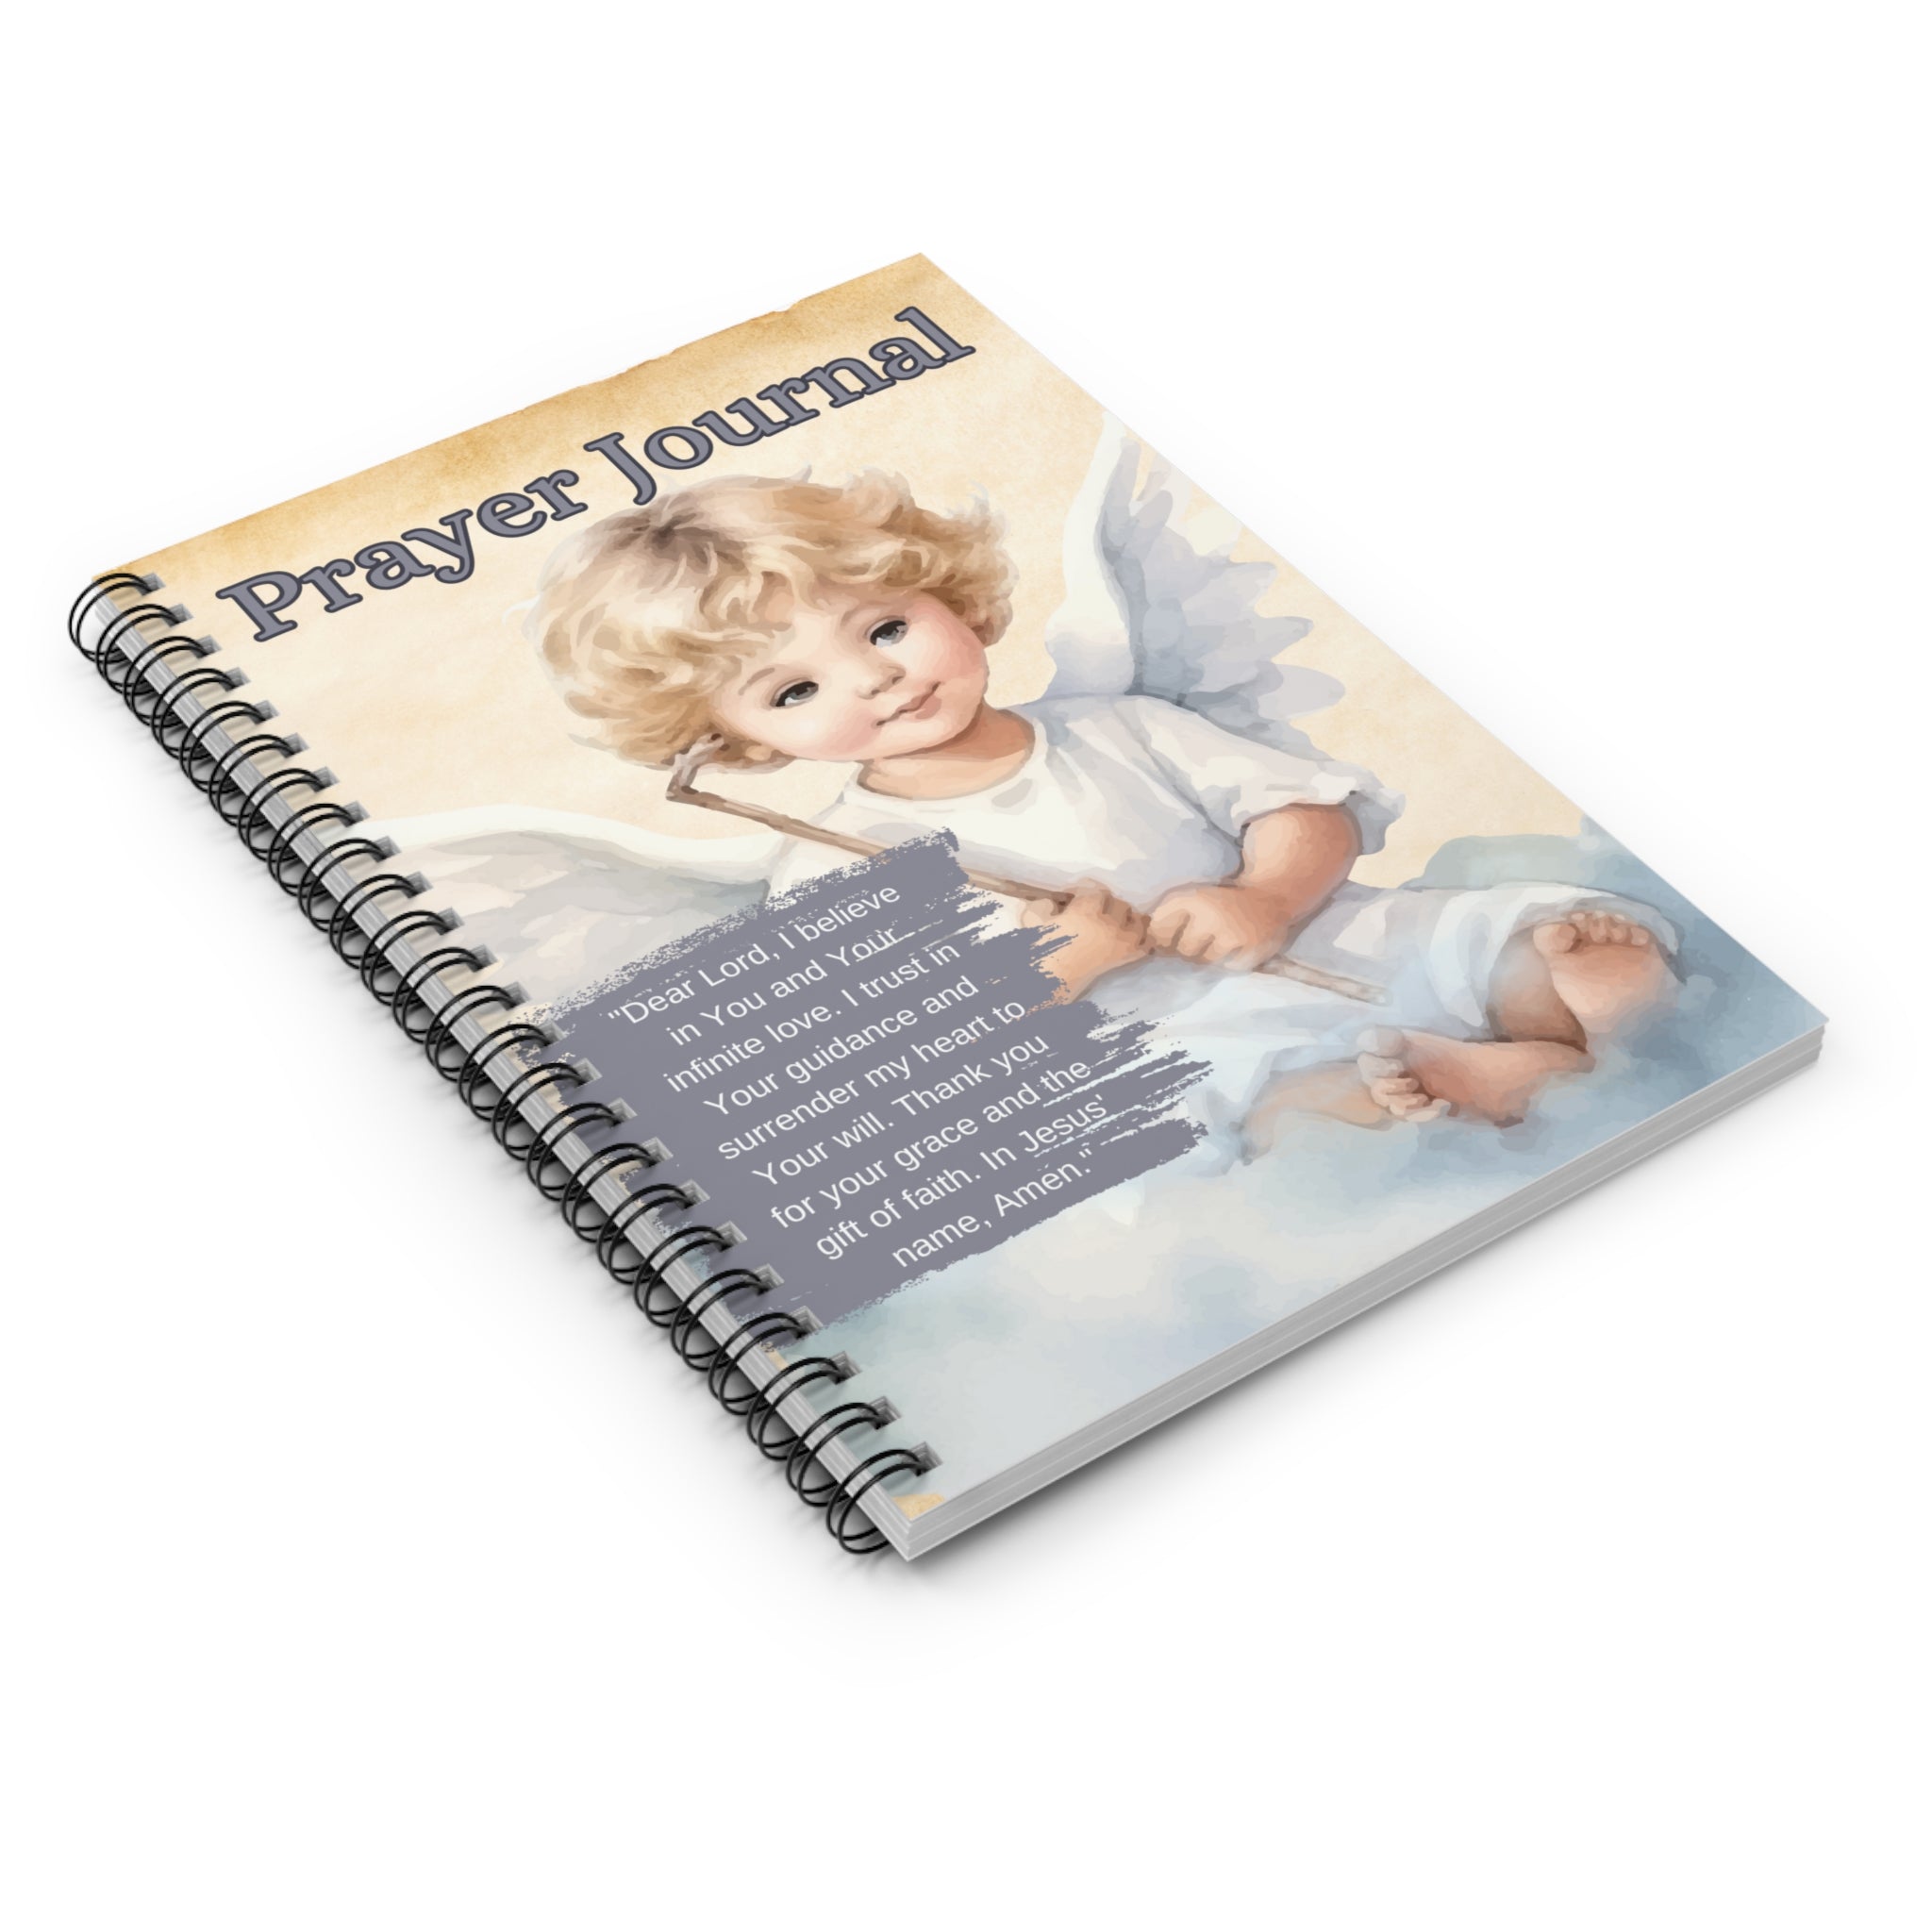 Prayer Journal Water Color Design Spiral Notebook - Ruled Line Paper products Krazy Heart Designs Boutique   